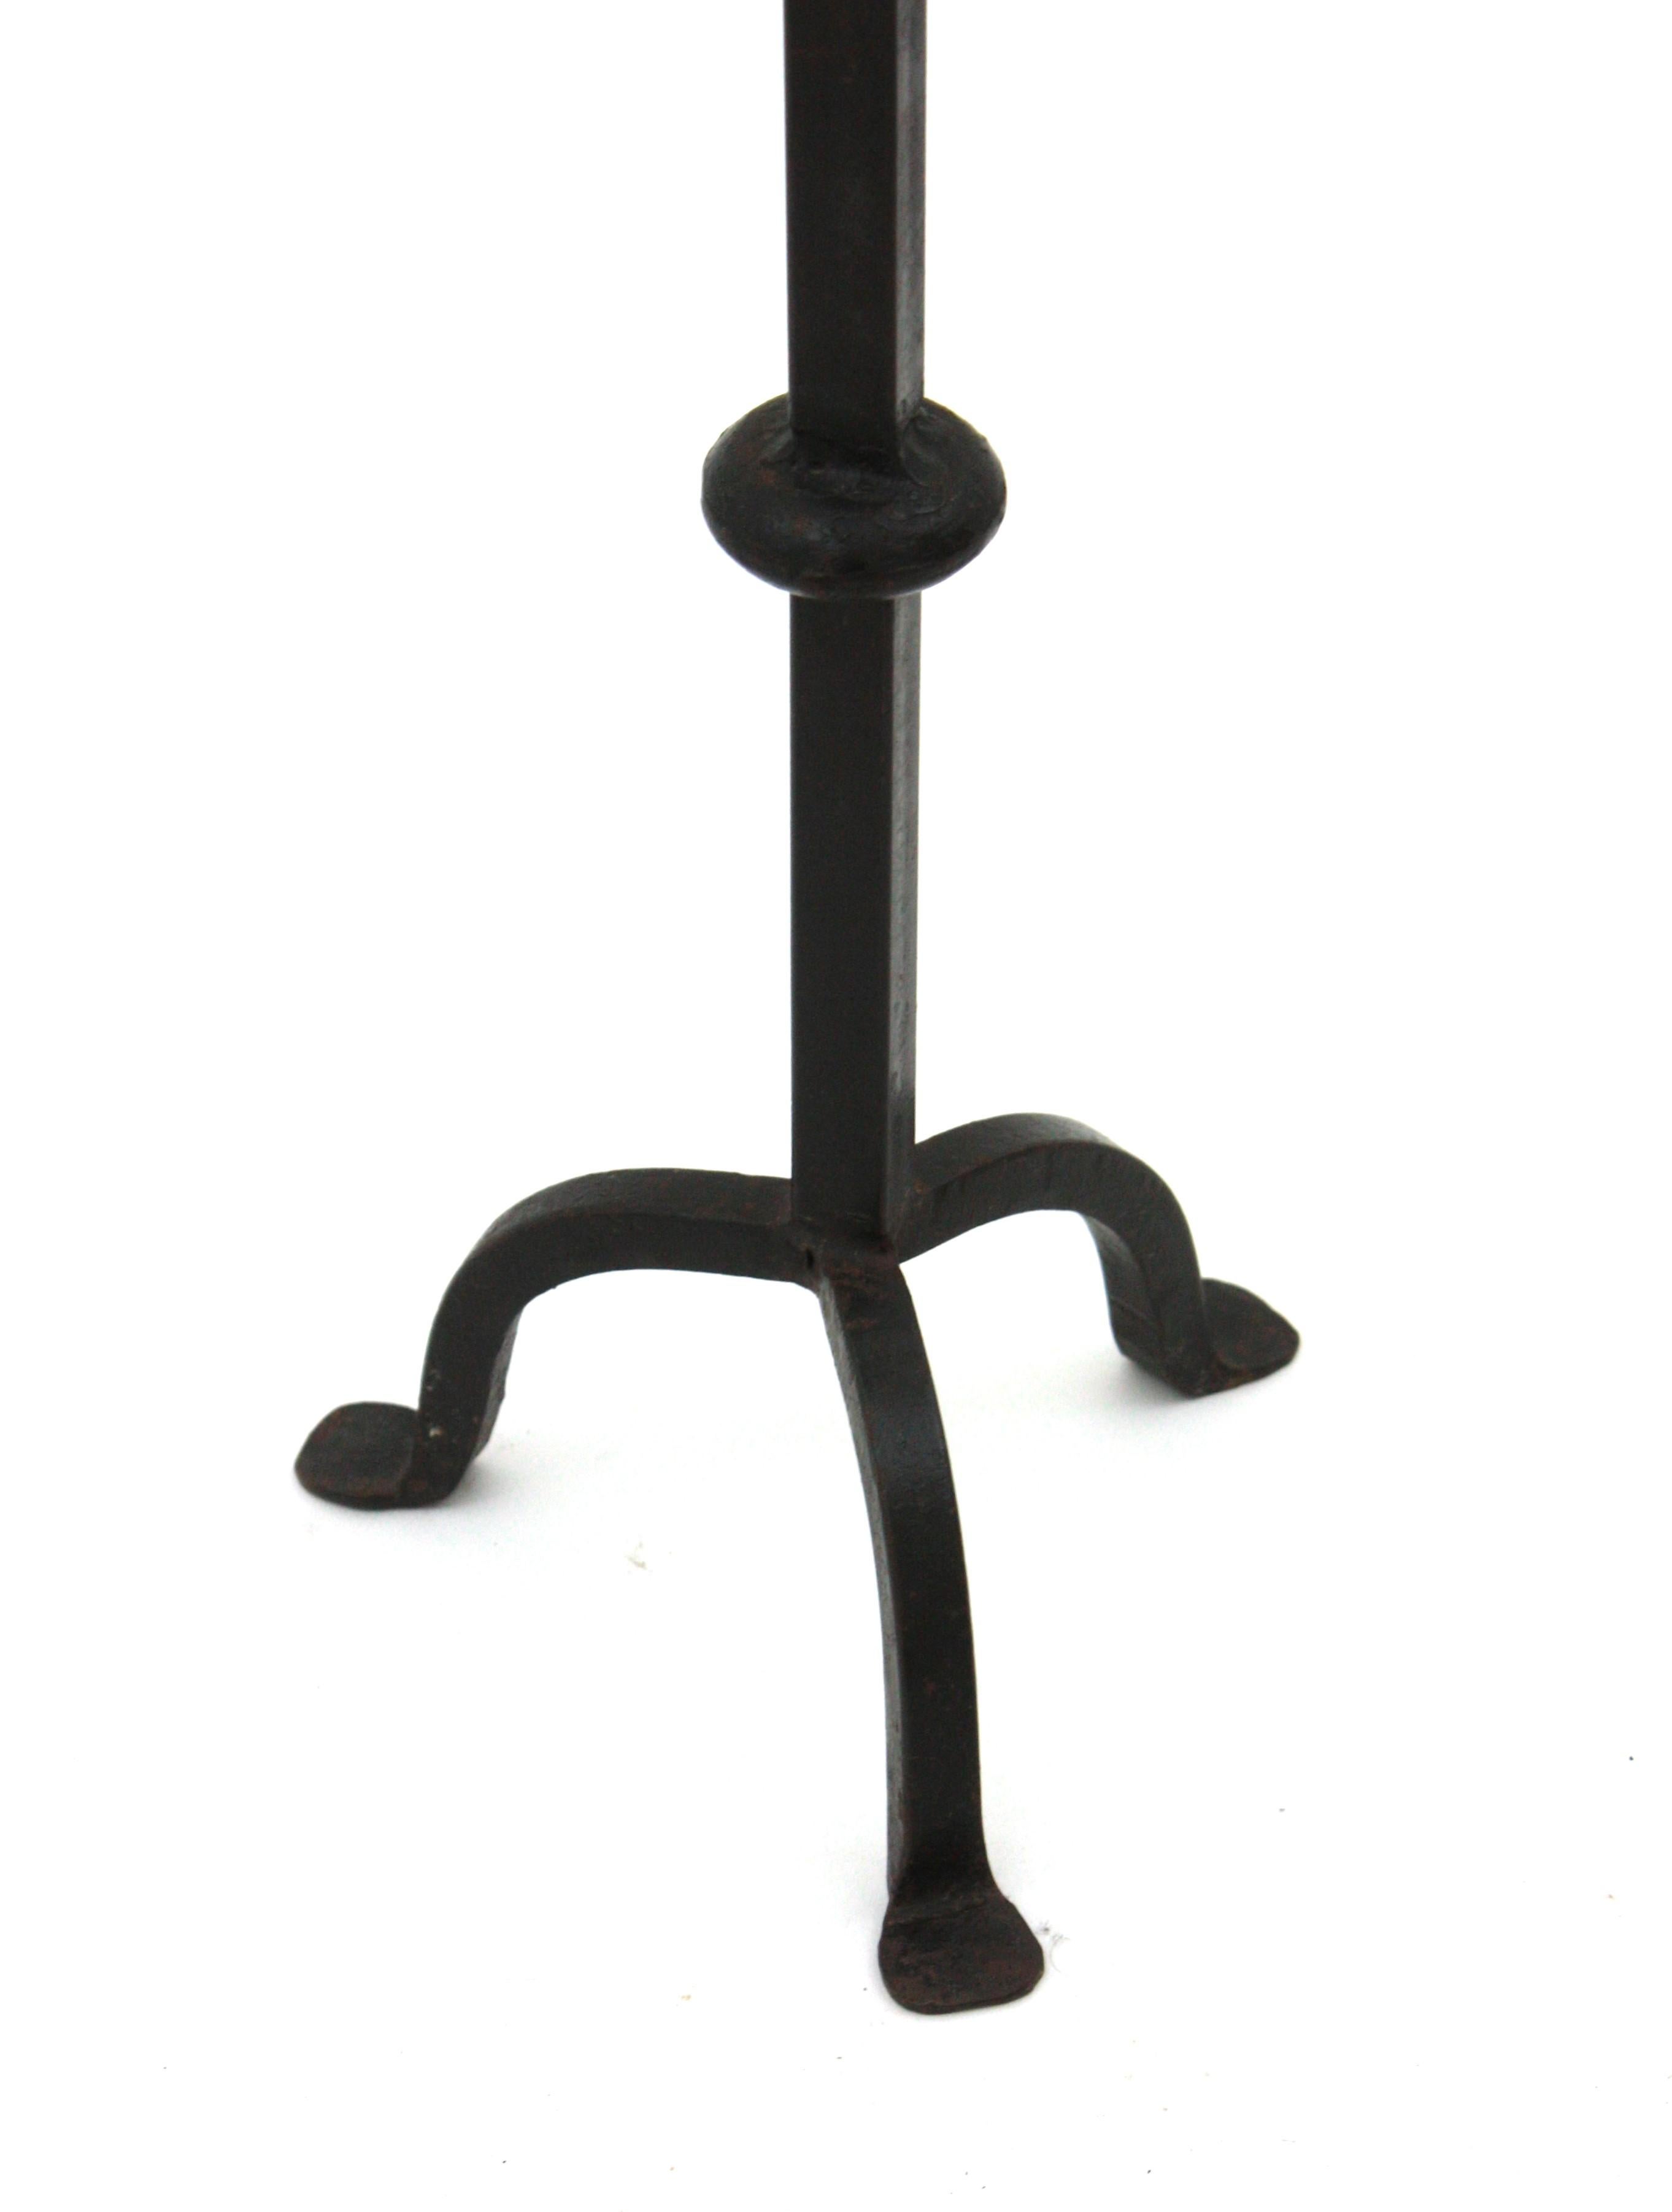 Spanish Medieval Hand Forged Iron Candle Stand / Floor Candle Holder For Sale 4